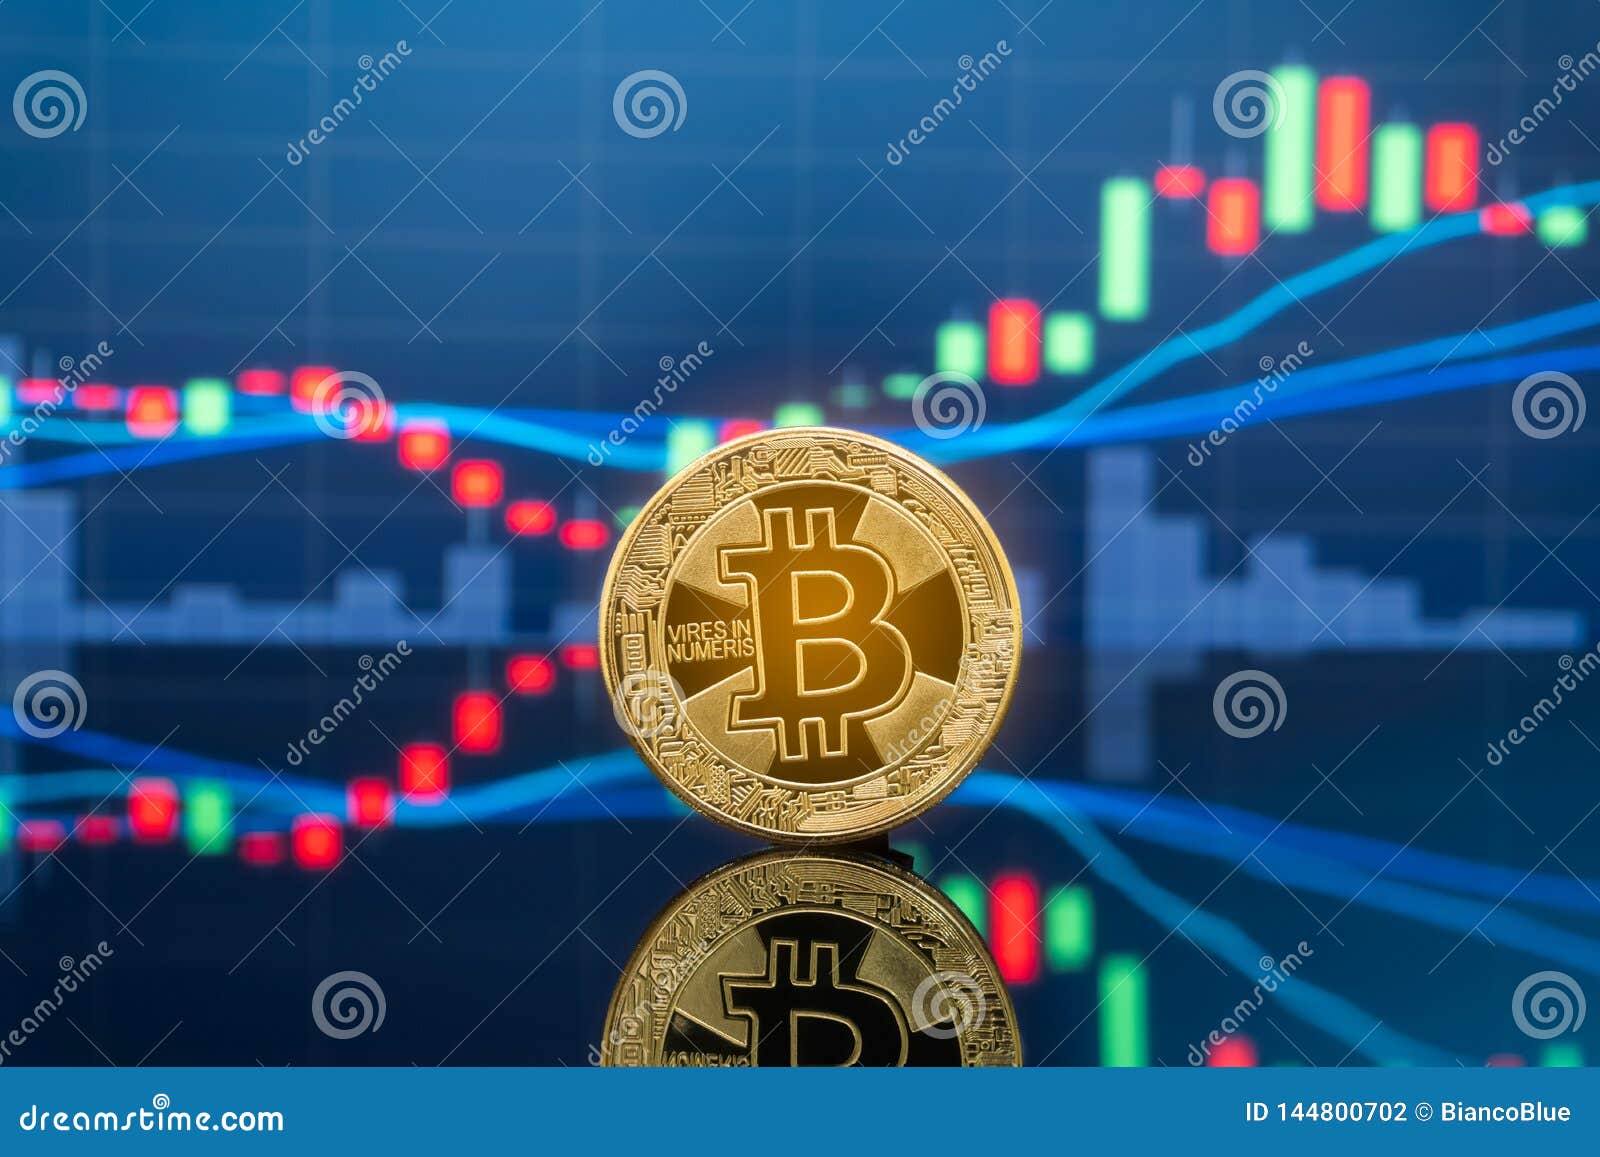 Bitcoin And Cryptocurrency Investing Concept Stock Photo ...